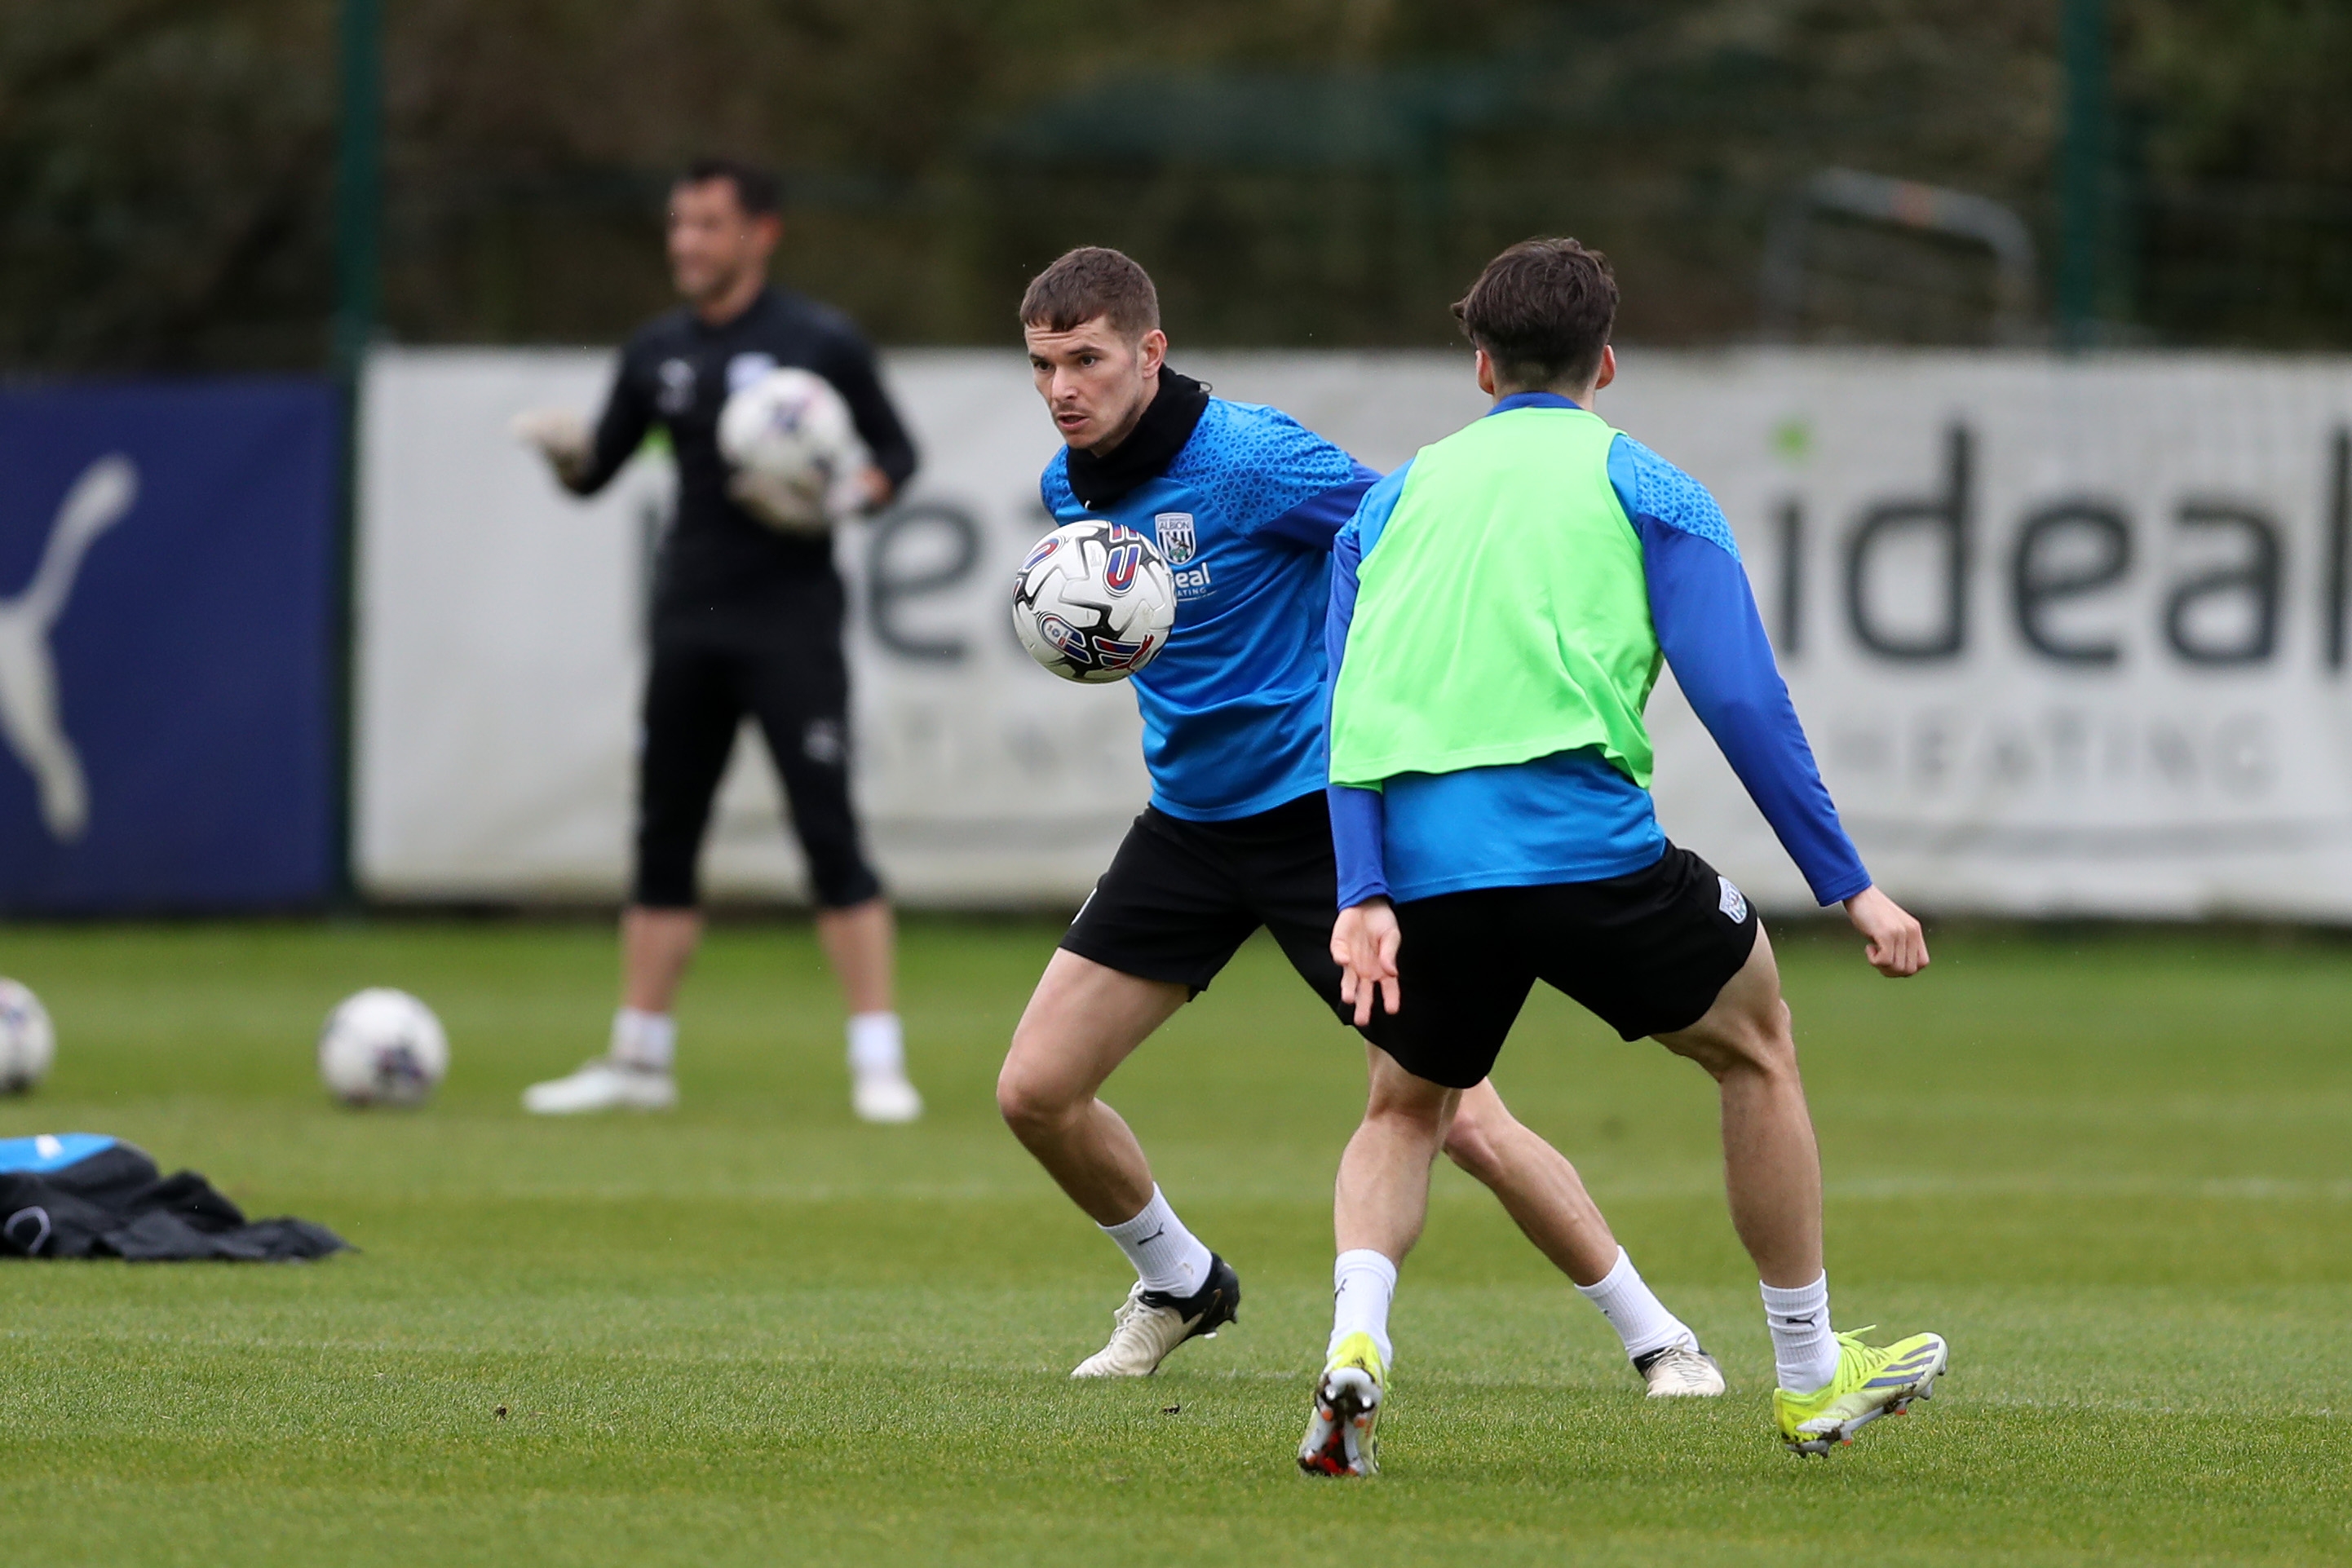 Conor Townsend on the ball during a training session